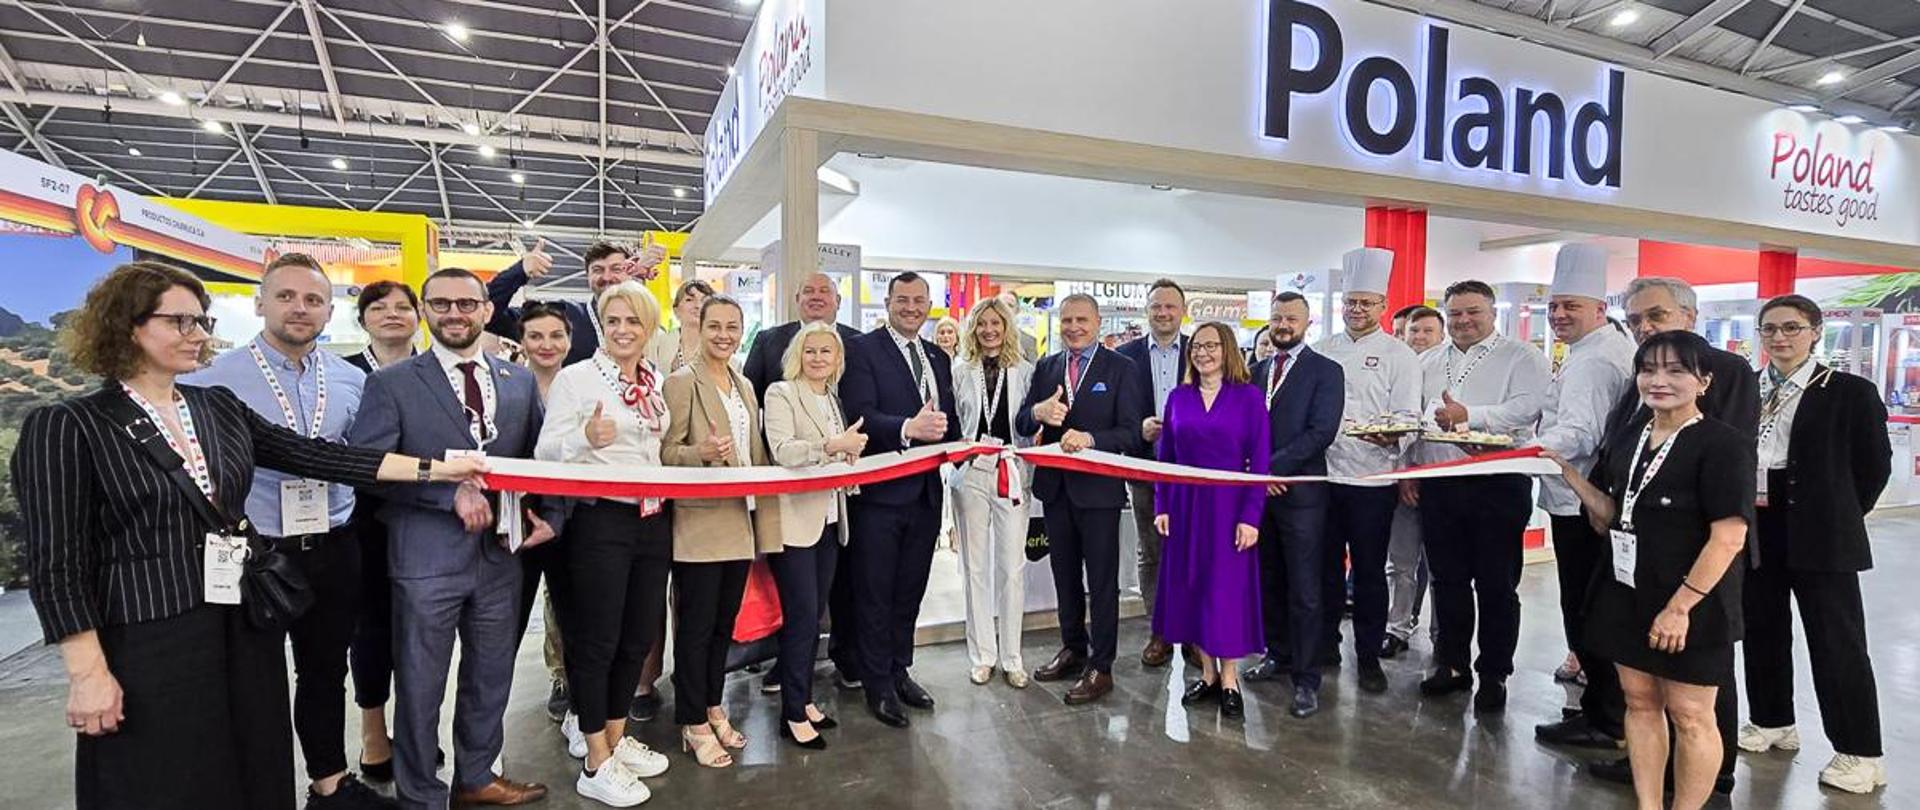 Opening ceremony of the Polish stand at FHA Food&Beverage